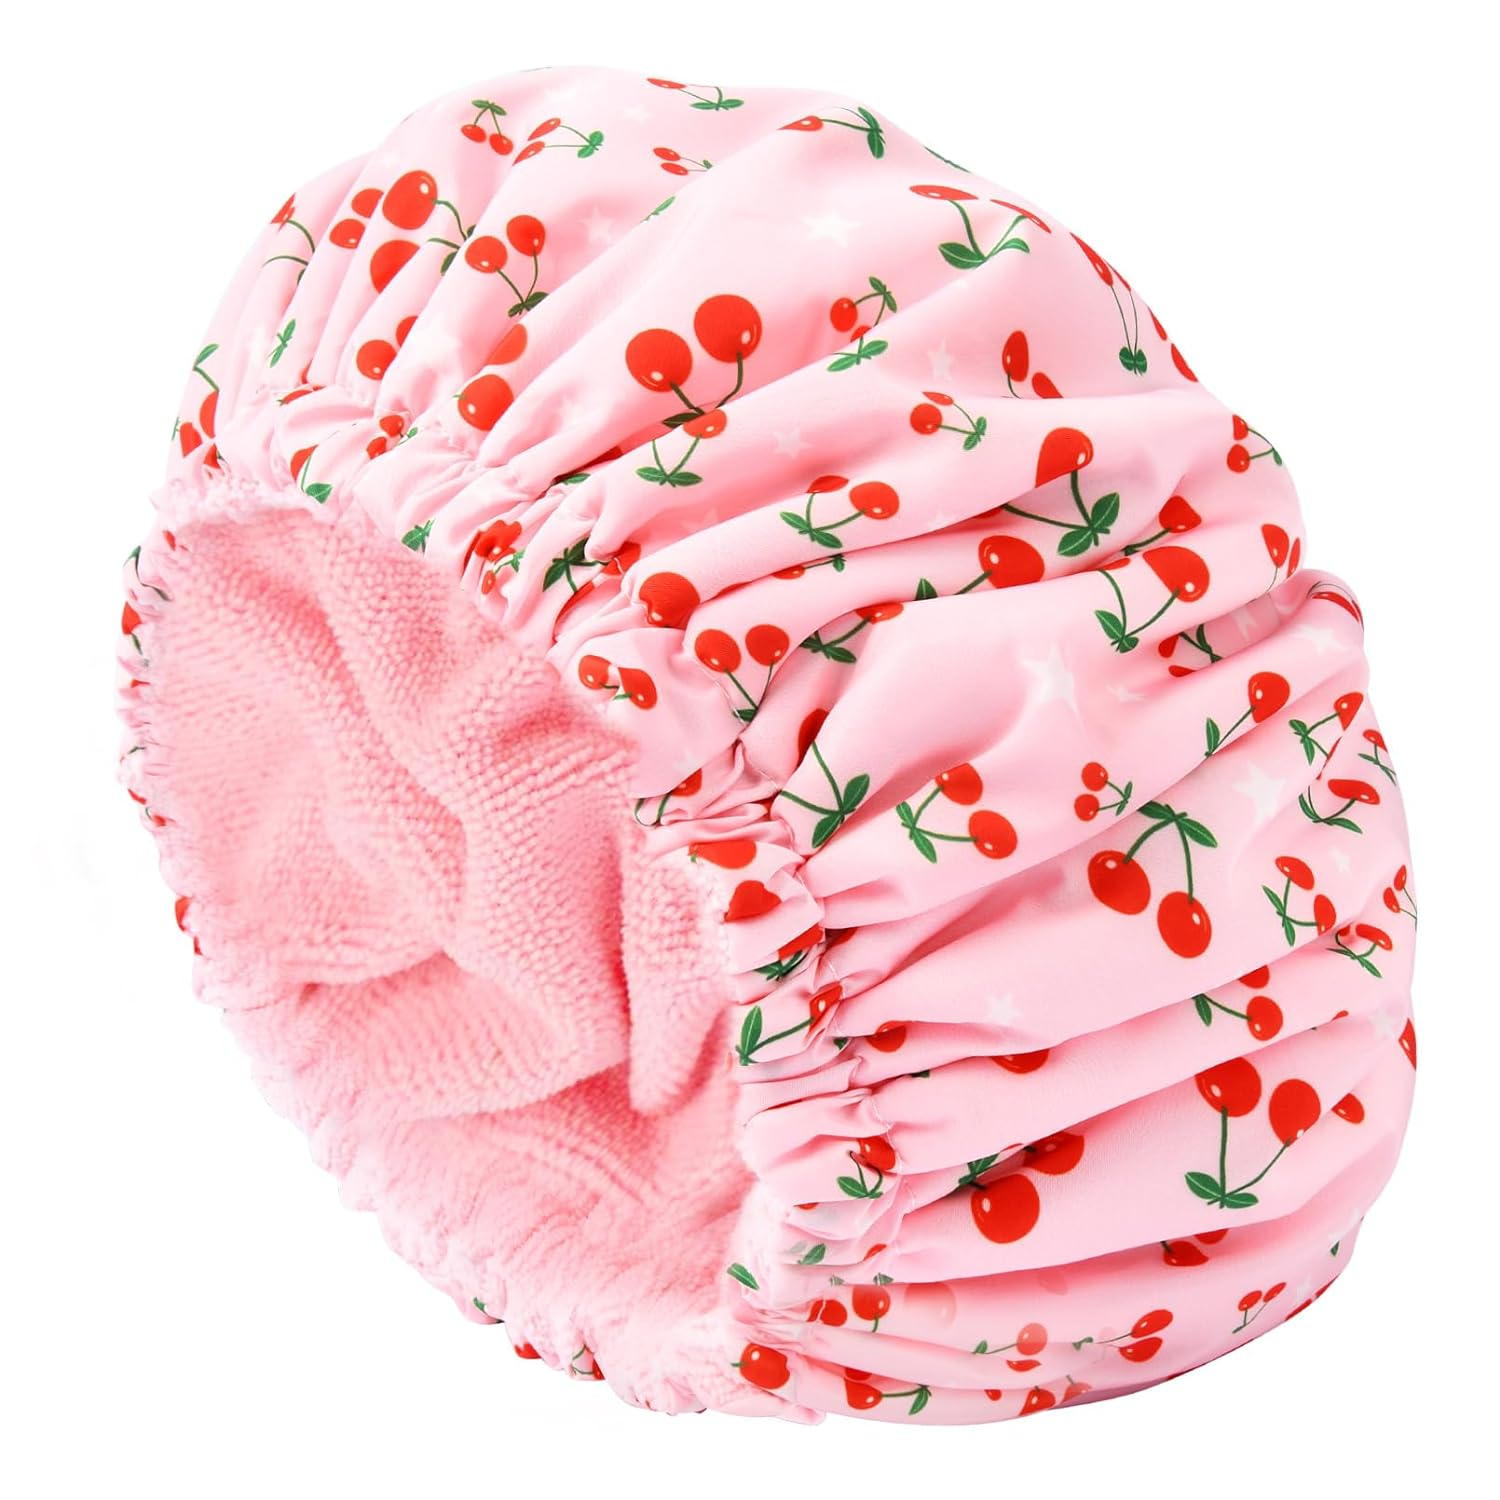 Shower Cap for Women Terry Lined Bath Cap Large Reusable Waterproof Elastic Band Pink Shower Caps